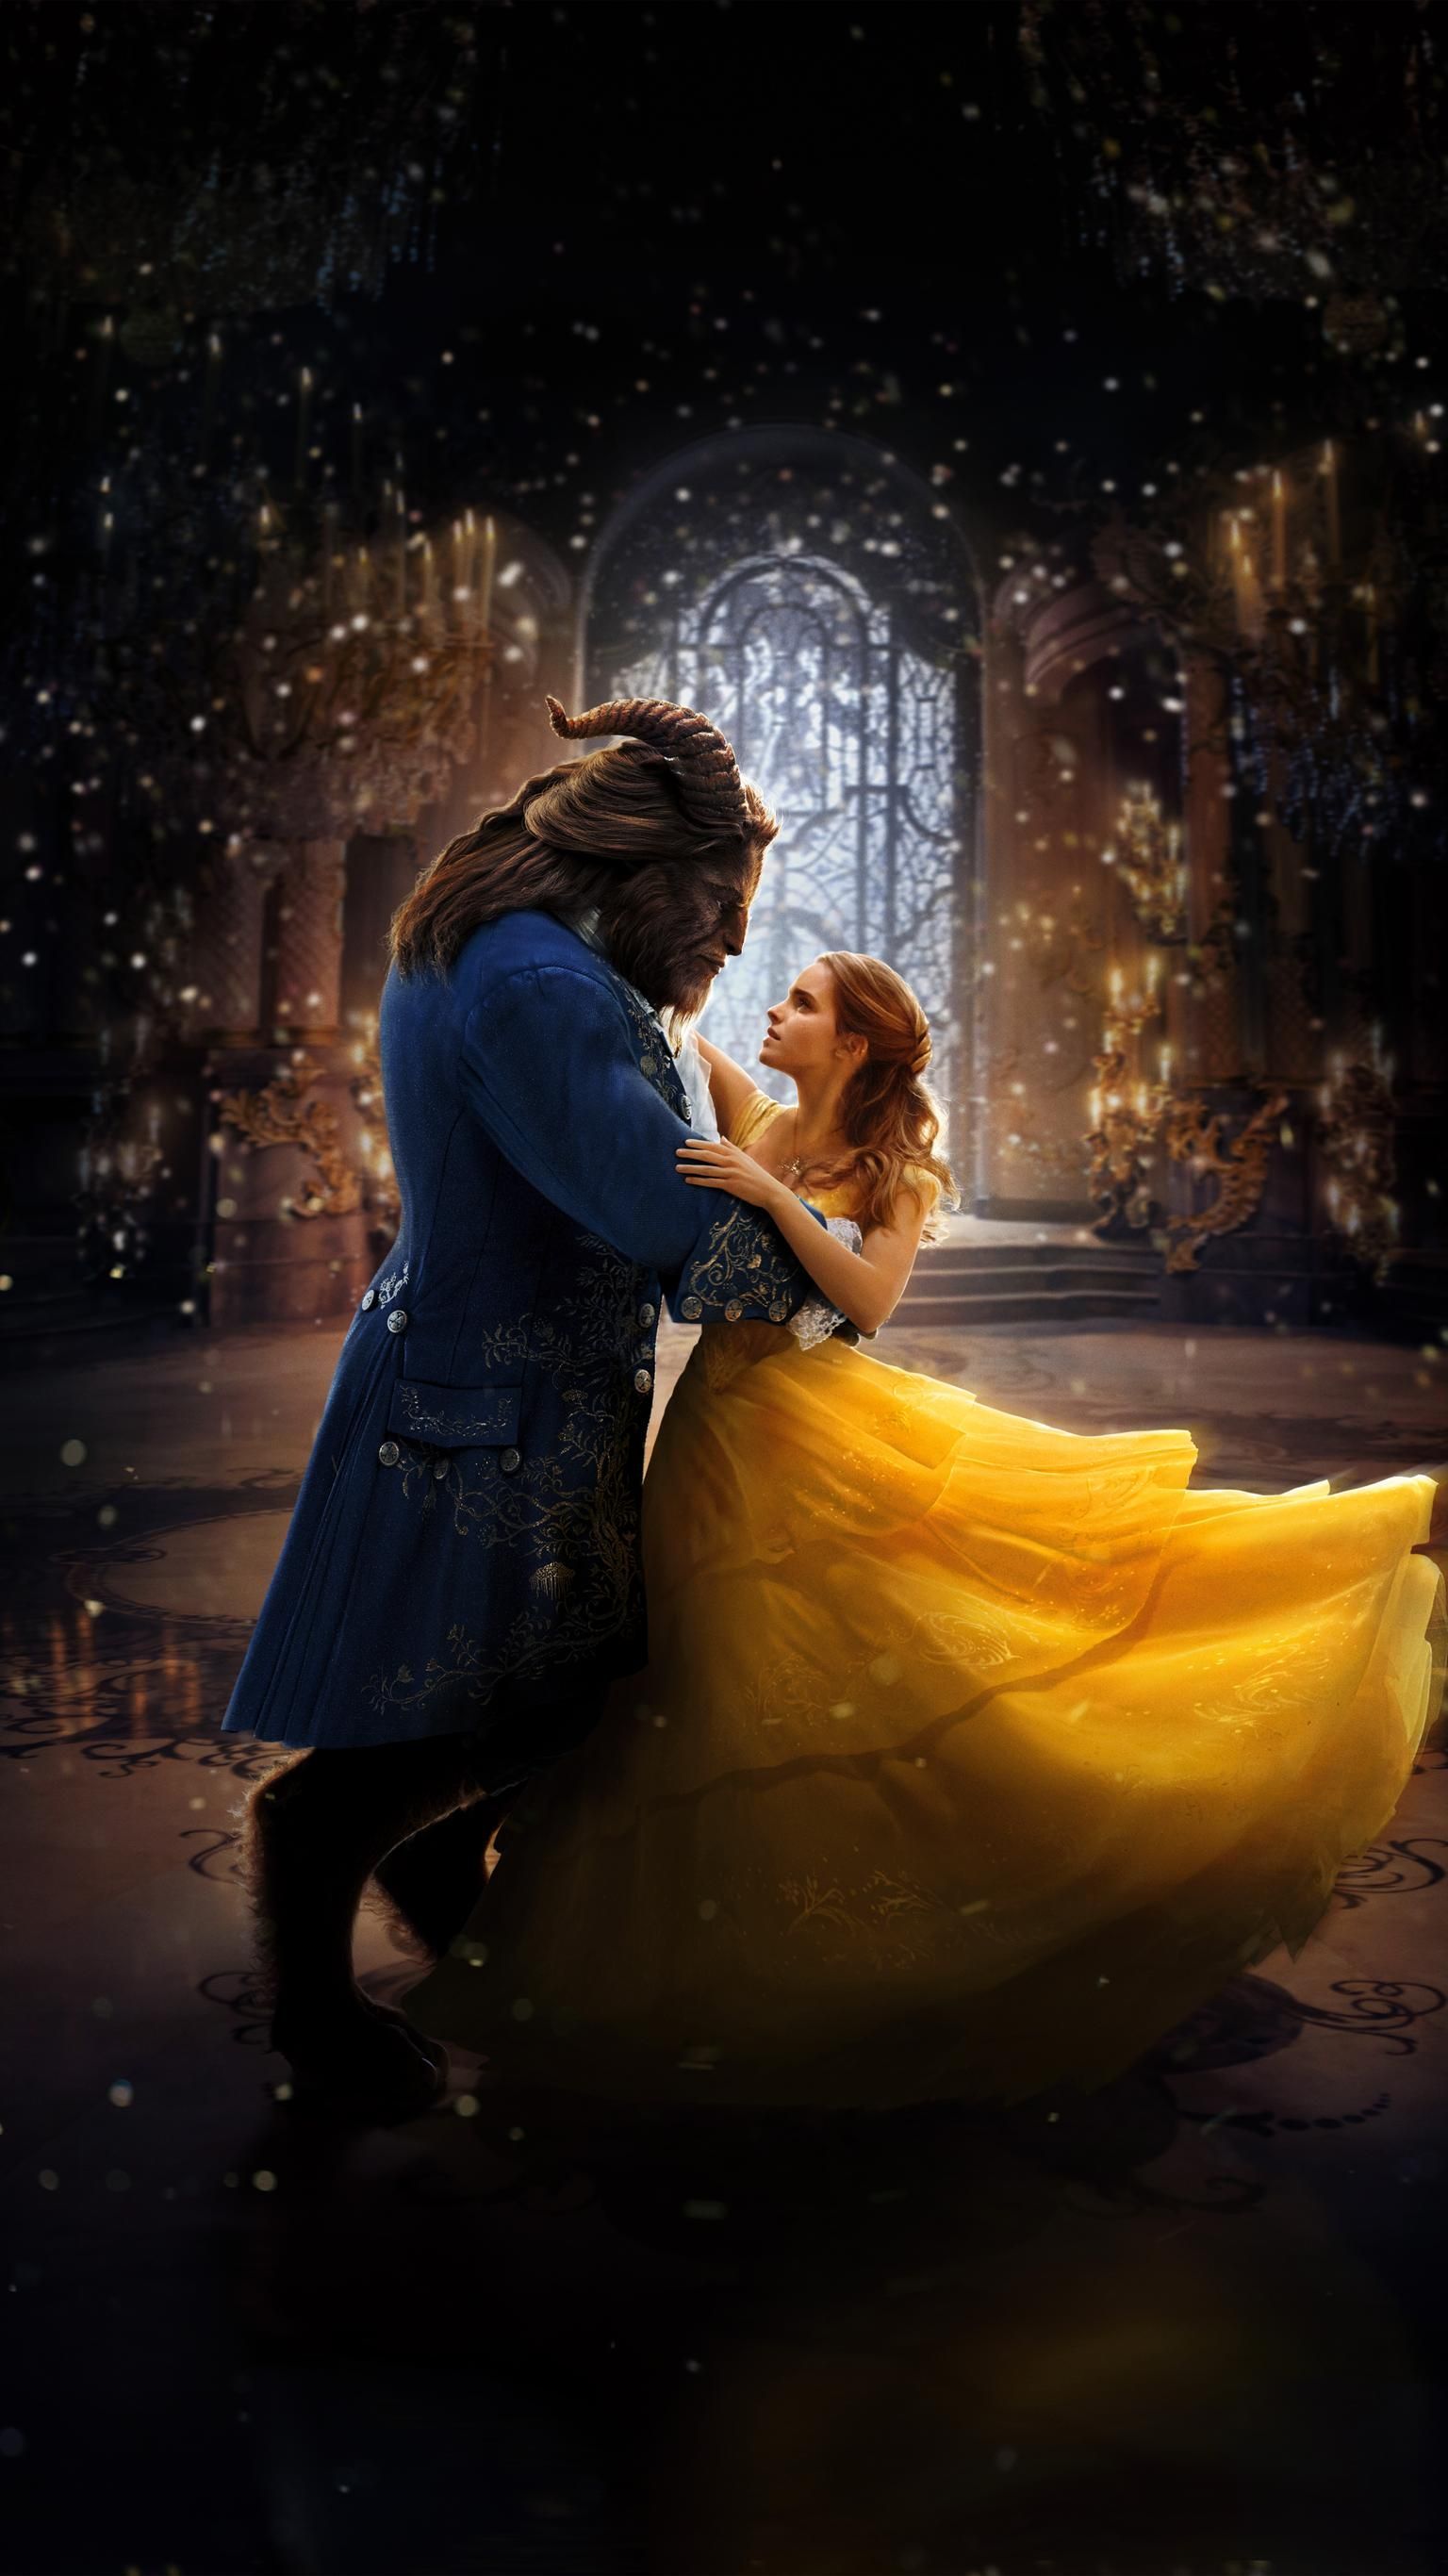 Beauty and the Beast (2017) Phone Wallpaper. Beauty, the beast